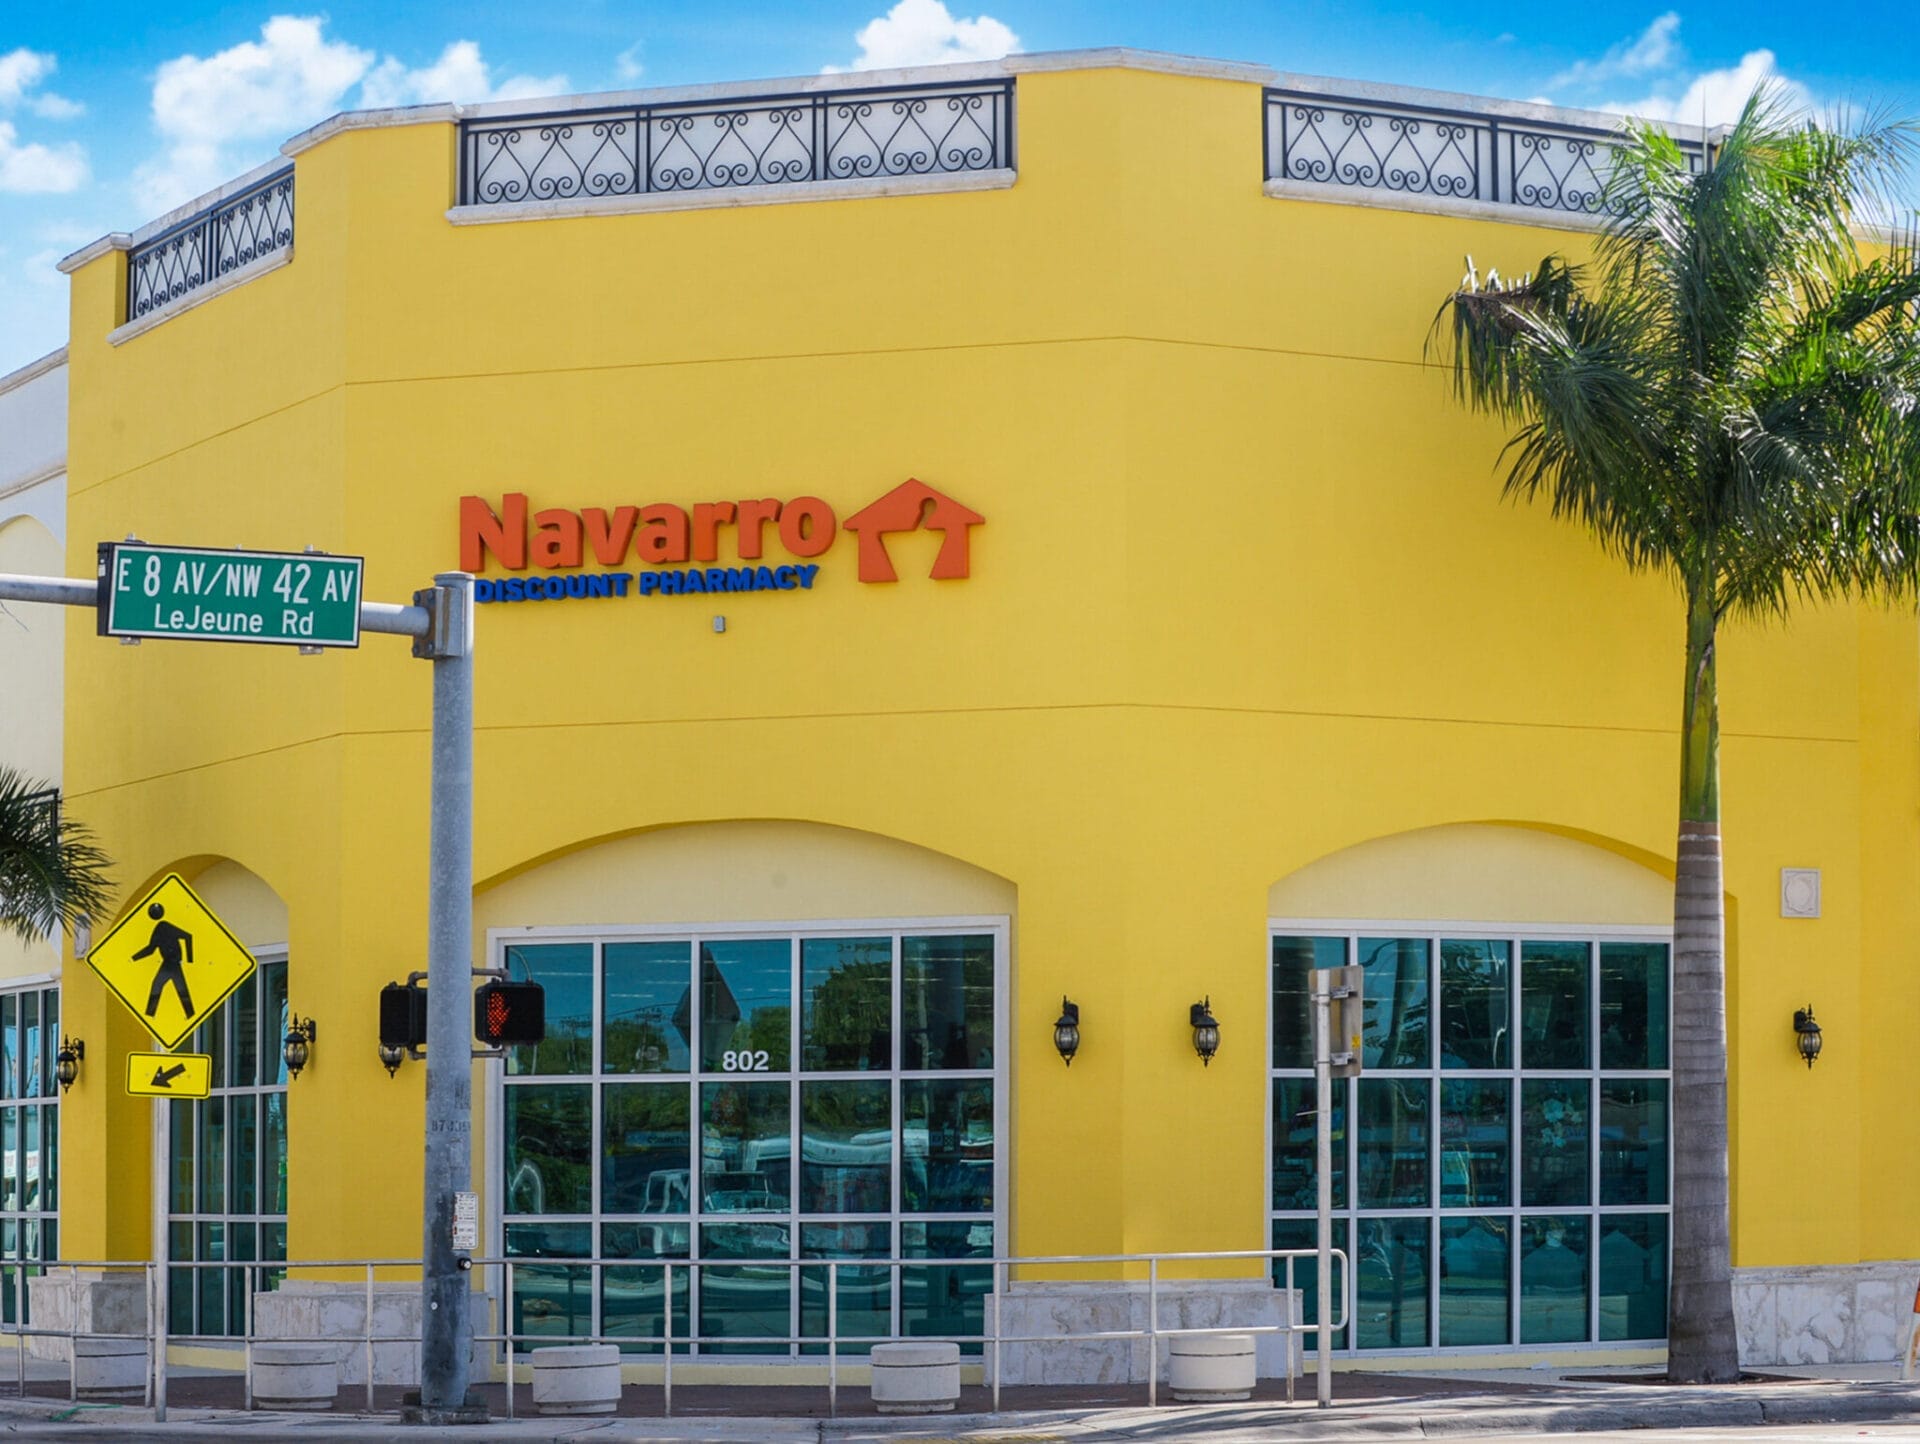 Exterior of a recently sold Navarro Discount Pharmacy (CVS) store with a bright yellow facade, located at the corner of a street in Hialeah, FL, under a clear blue sky